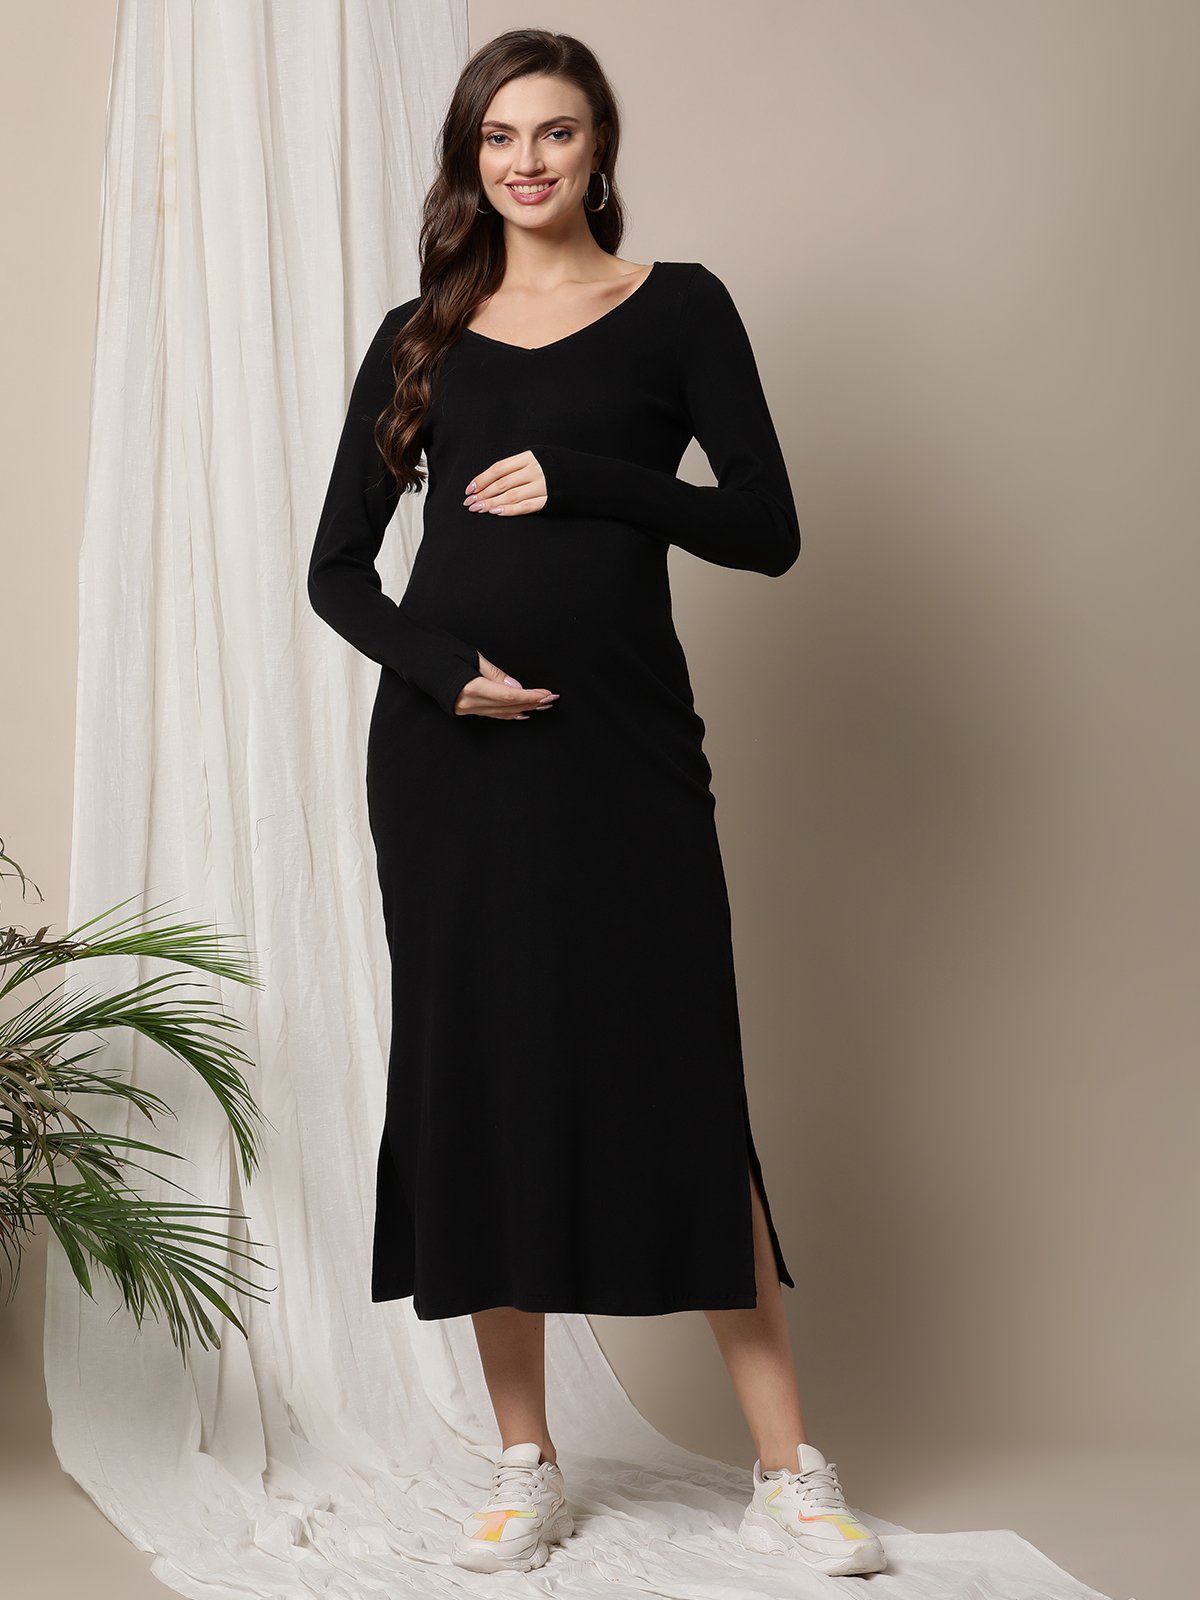 Women's Designer Maternity Dresses & Party Wear Pregnancy Outfits -  Nolabels.in